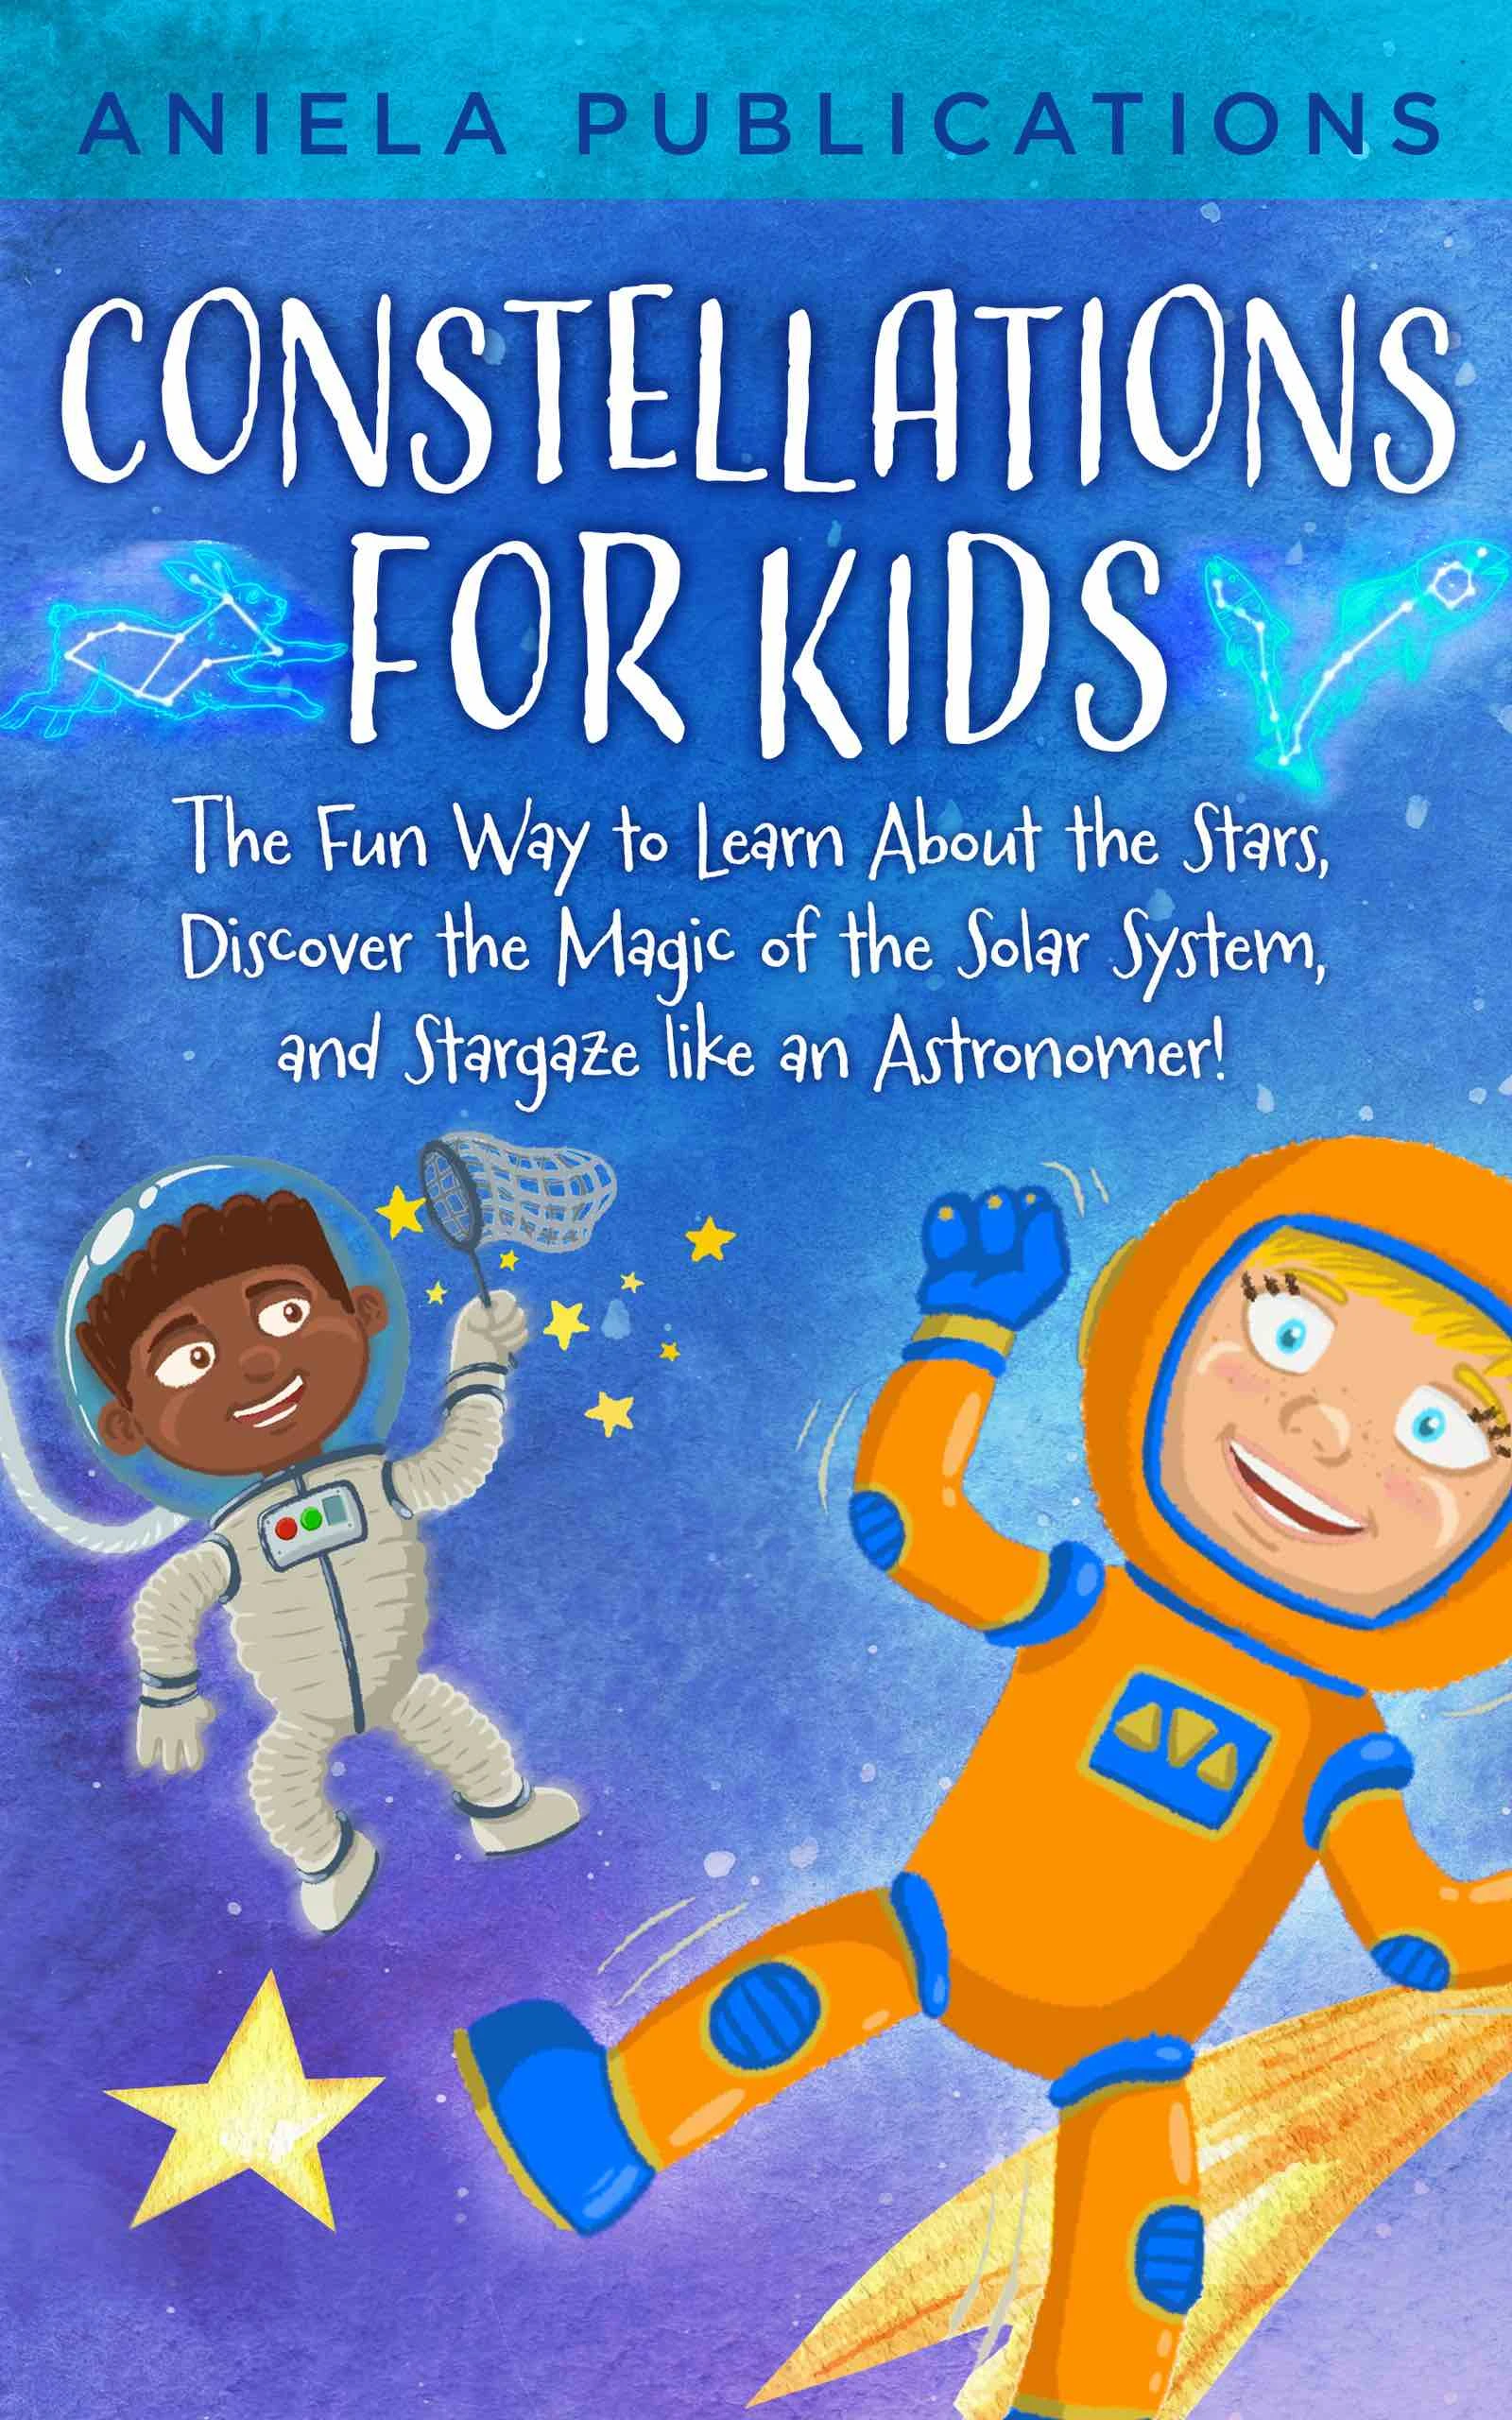 Constellations for Kids: The Fun Way to Learn About the Stars, Discover the Magic of the Solar System, and Stargaze like an Astronomer!